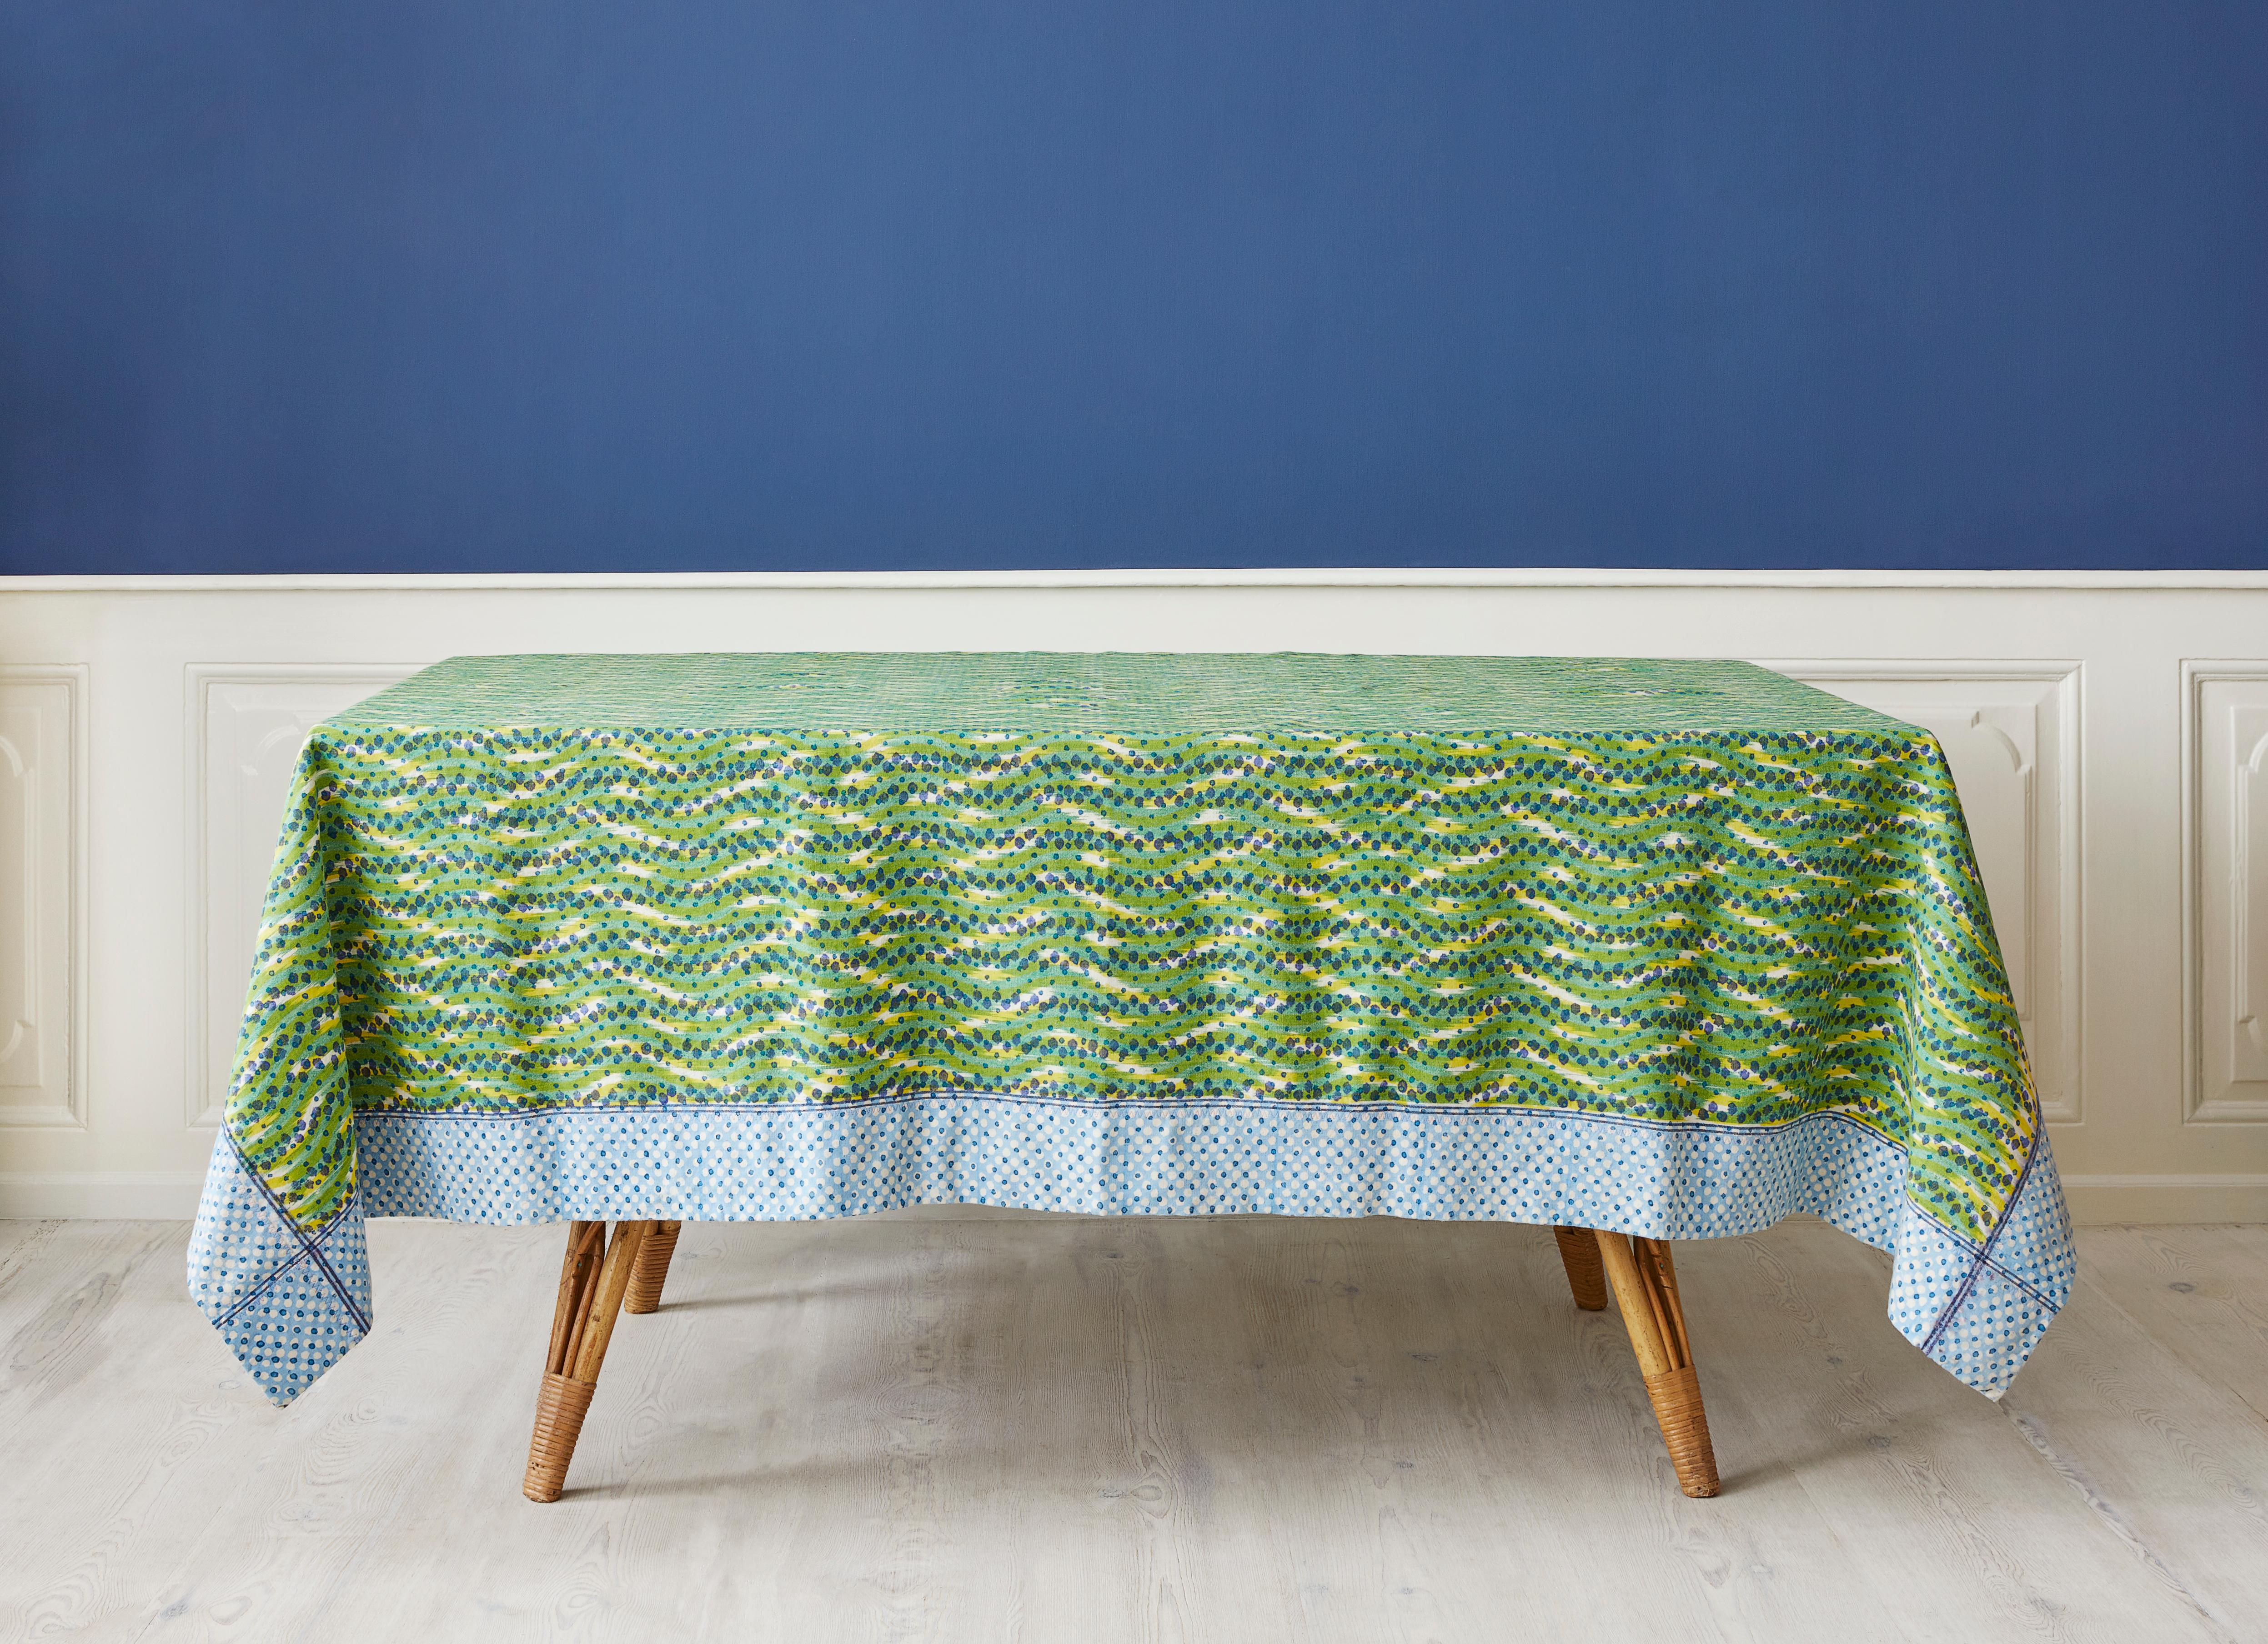 Gregory Parkinson
USA, Contemporary

One of a kind tablecloth with hand-blocked patterns on ikat textile. 

Measures: W 218 x D 174 cm.